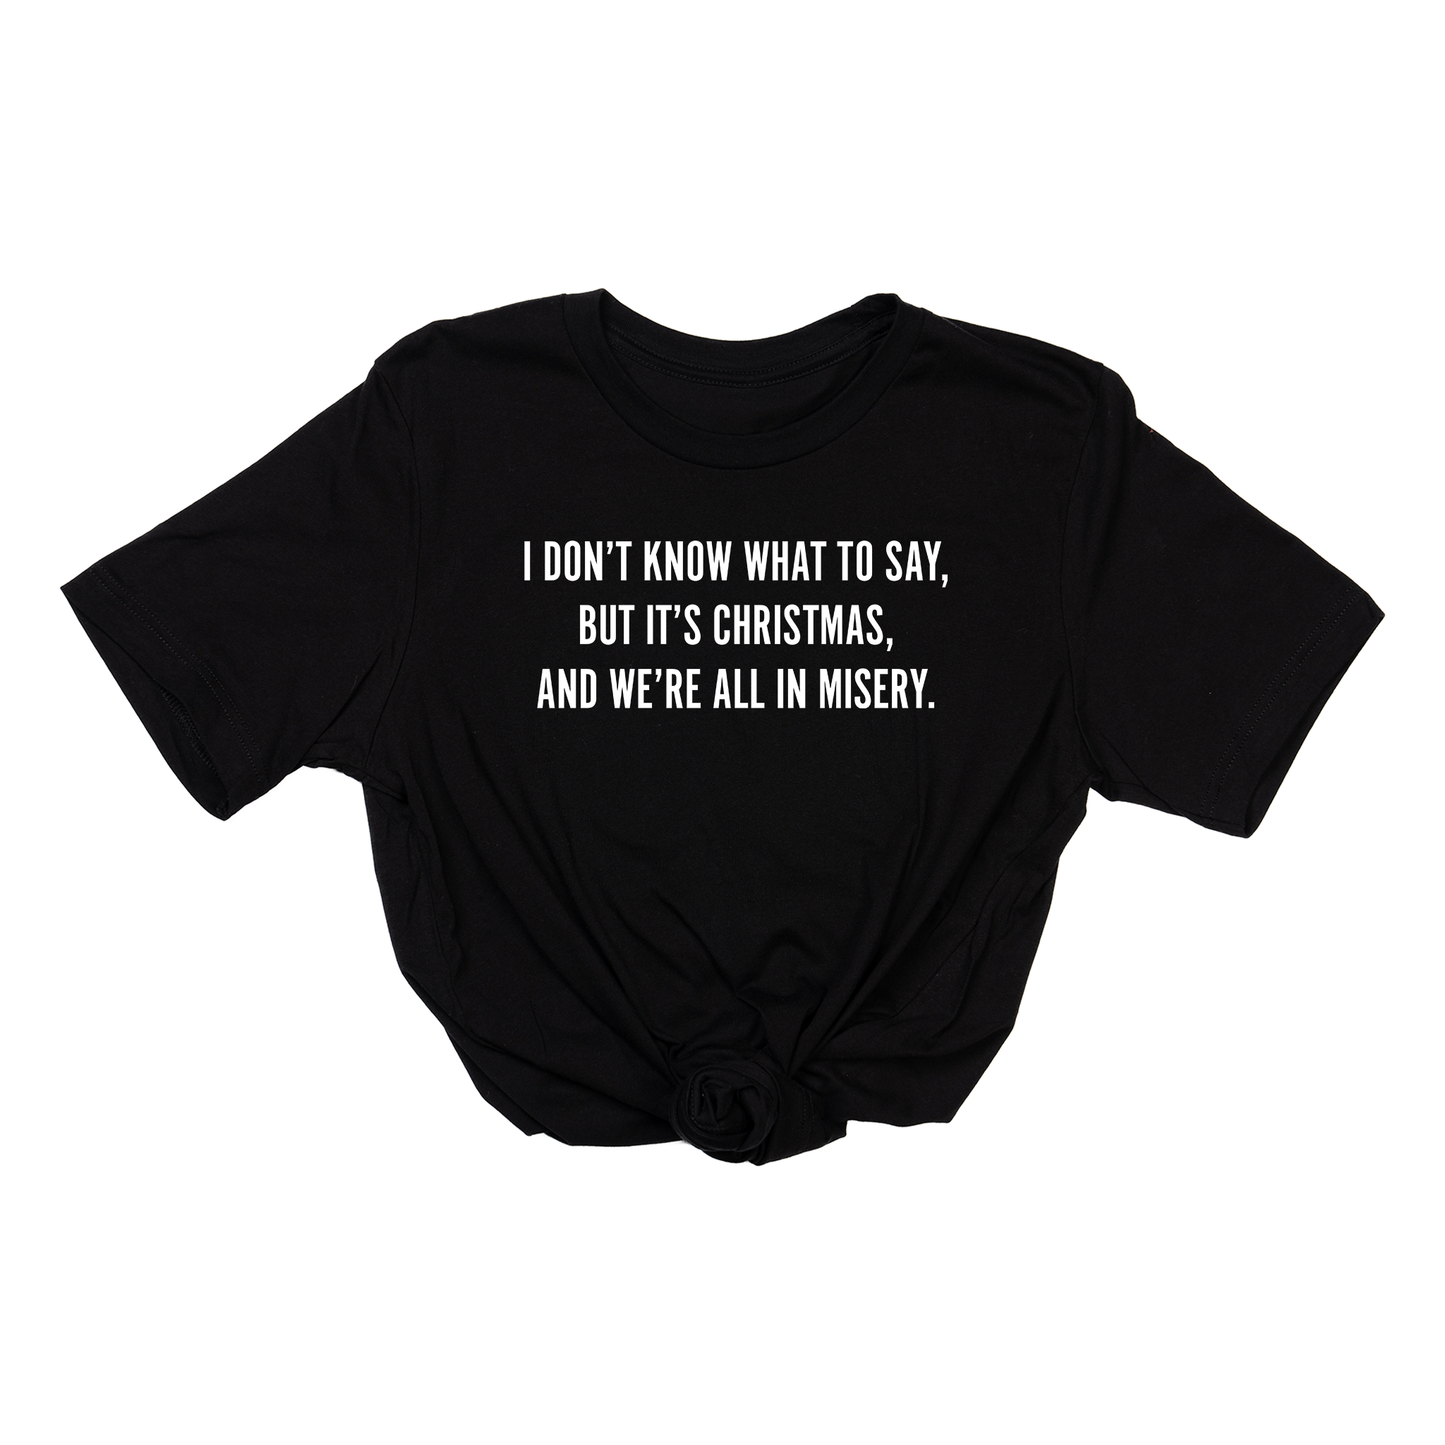 I Don't Know What to Say, But it's Christmas, and We're All In Misery  (White) - Tee (Black)